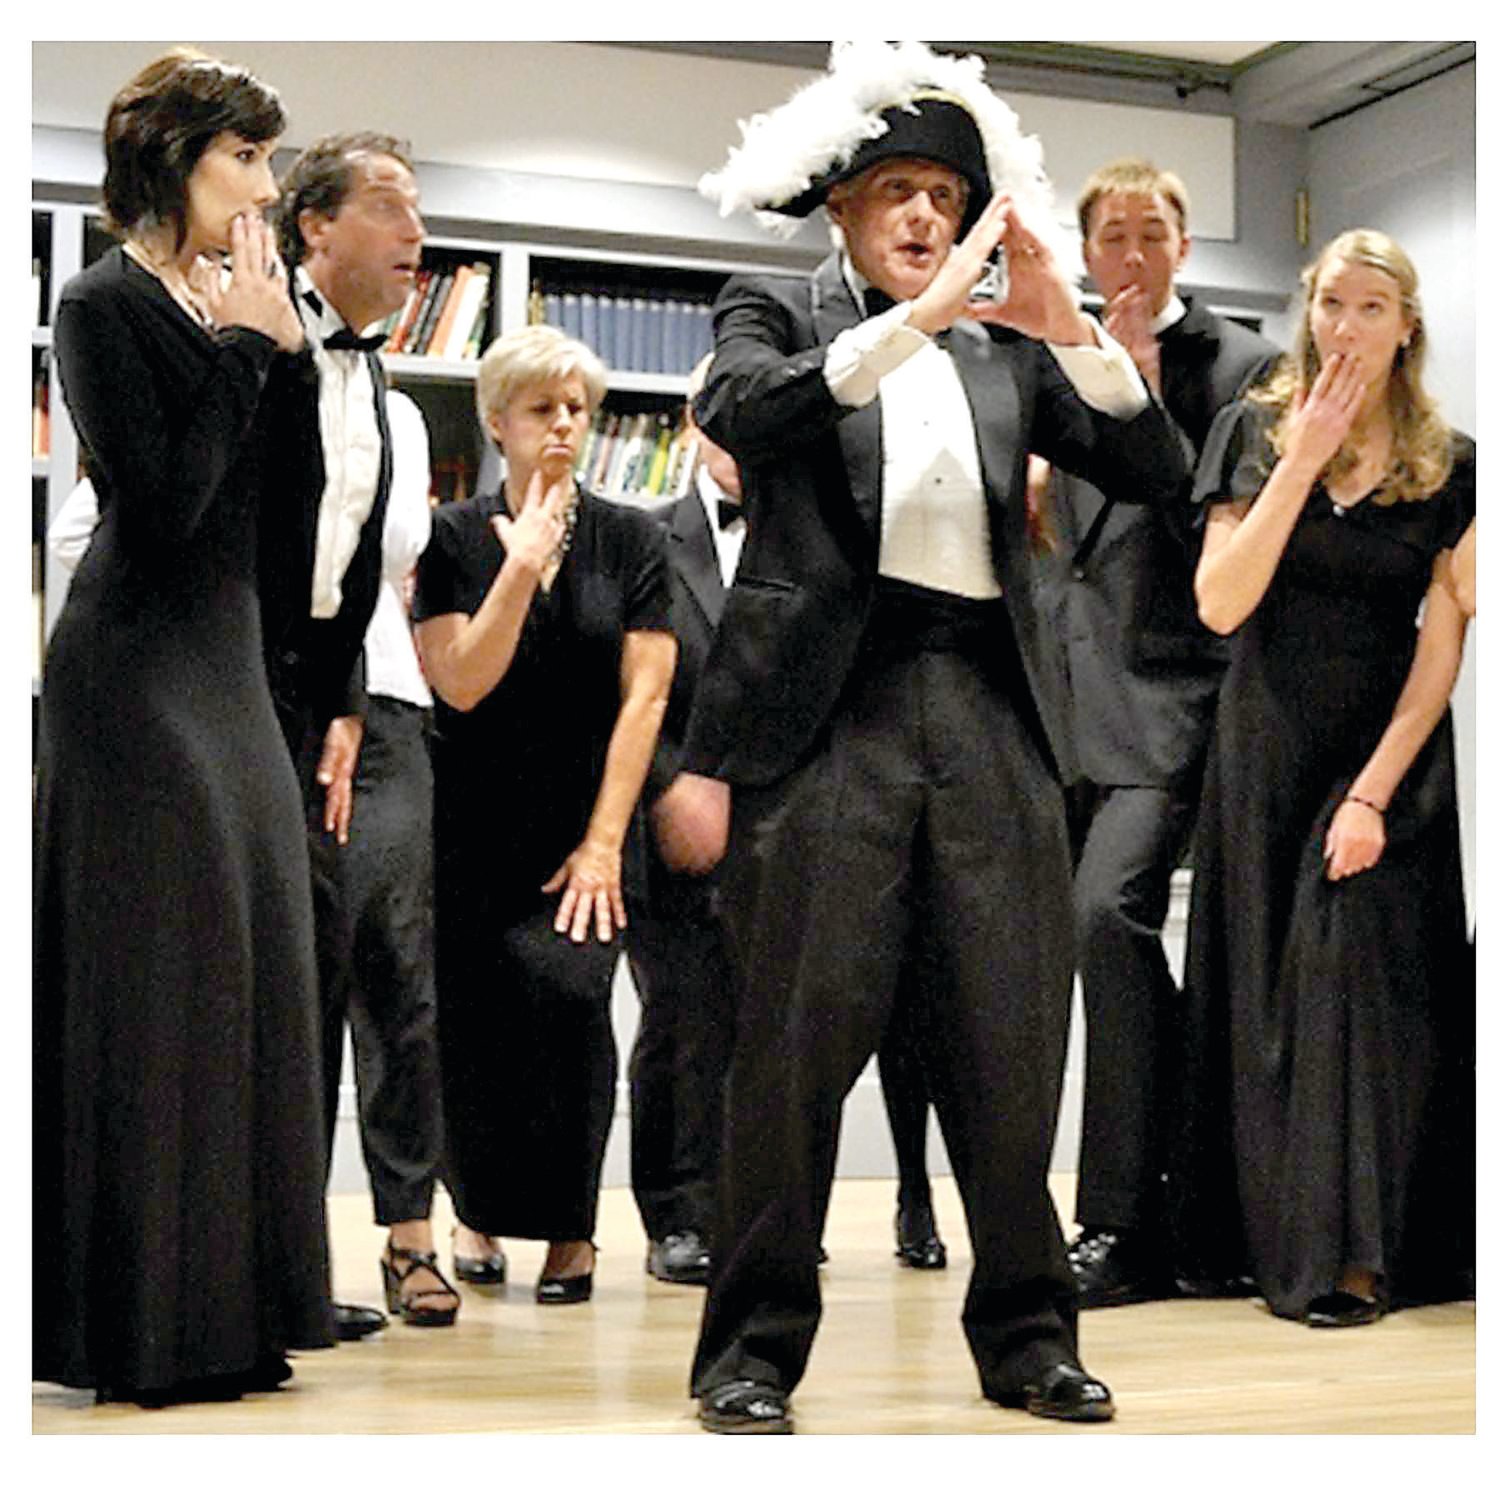 Members of the Bucks County Gilbert & Sullivan Society will perform Broadway and operetta tunes at their Autumn Dessert Cabaret.